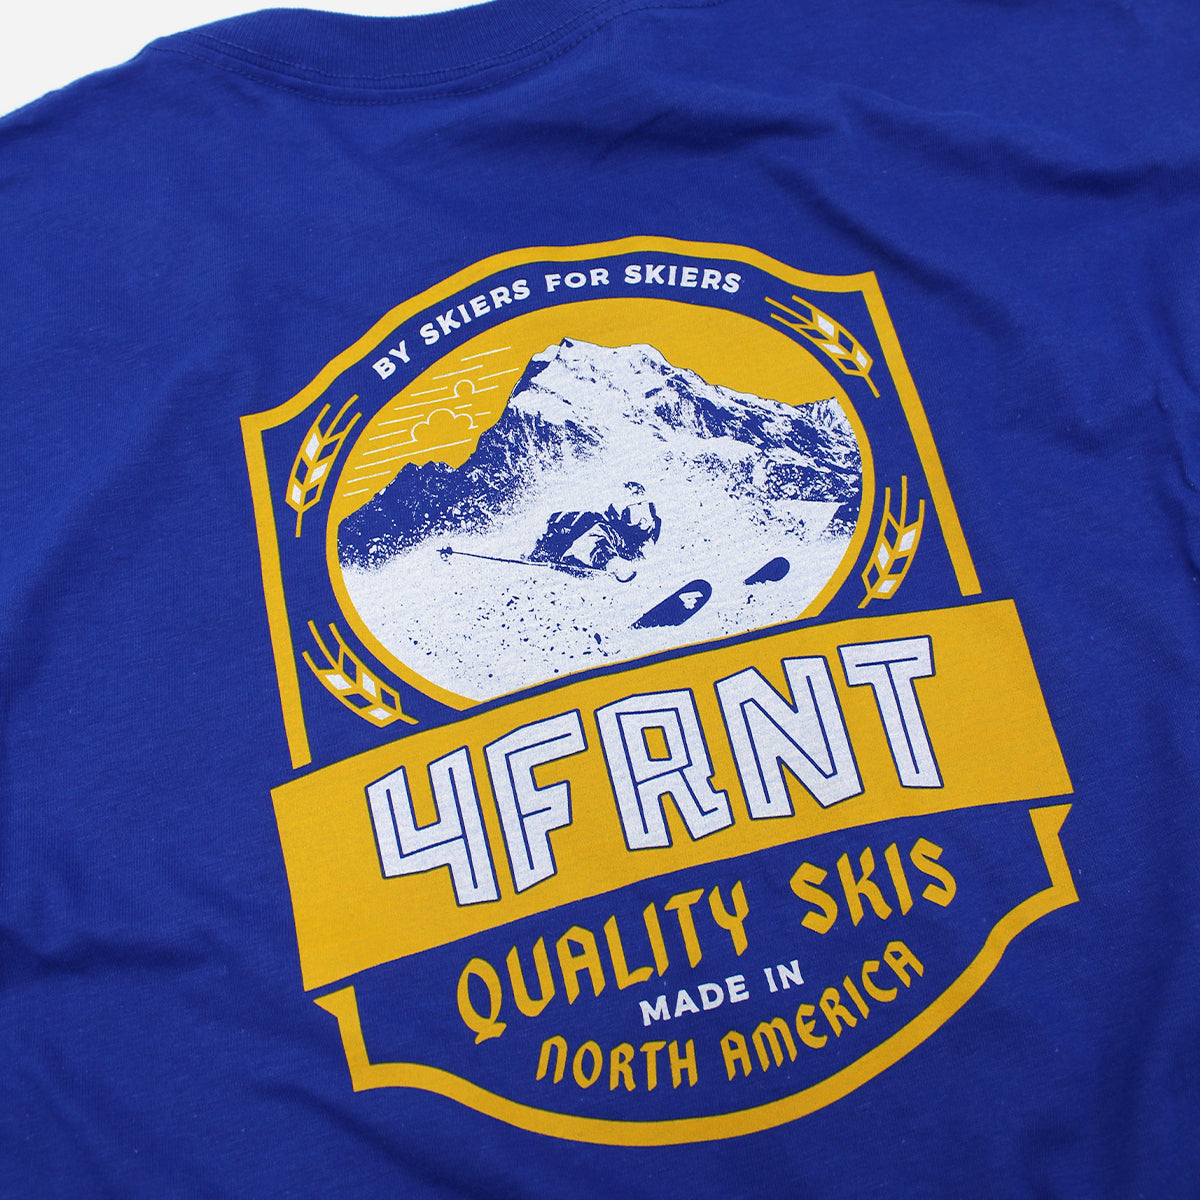 Beer Hall Tee from 4frnt skis close up of graphic